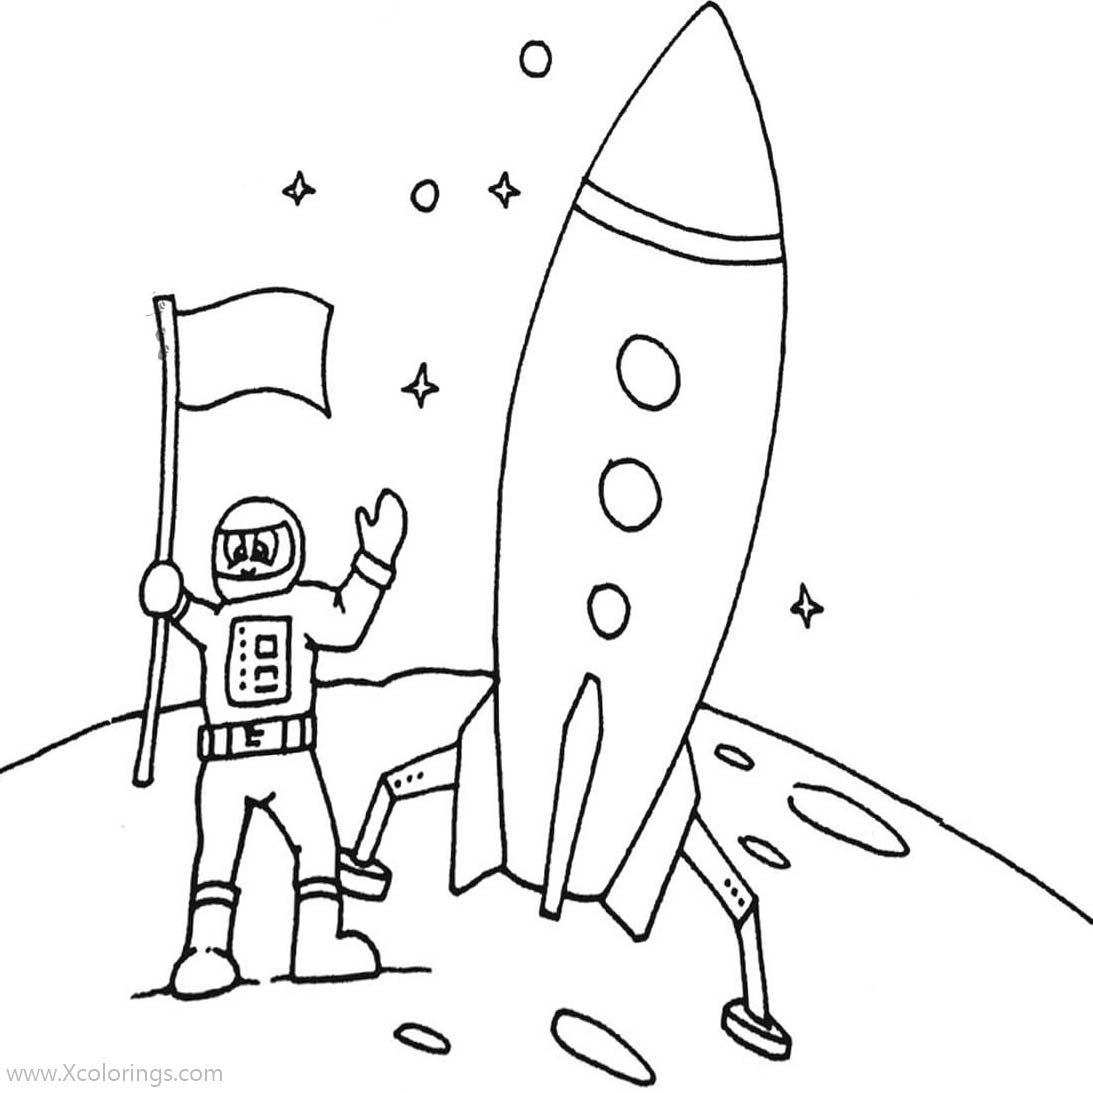 Free Astronaut Landed the Moon with a Rocket Coloring Pages printable